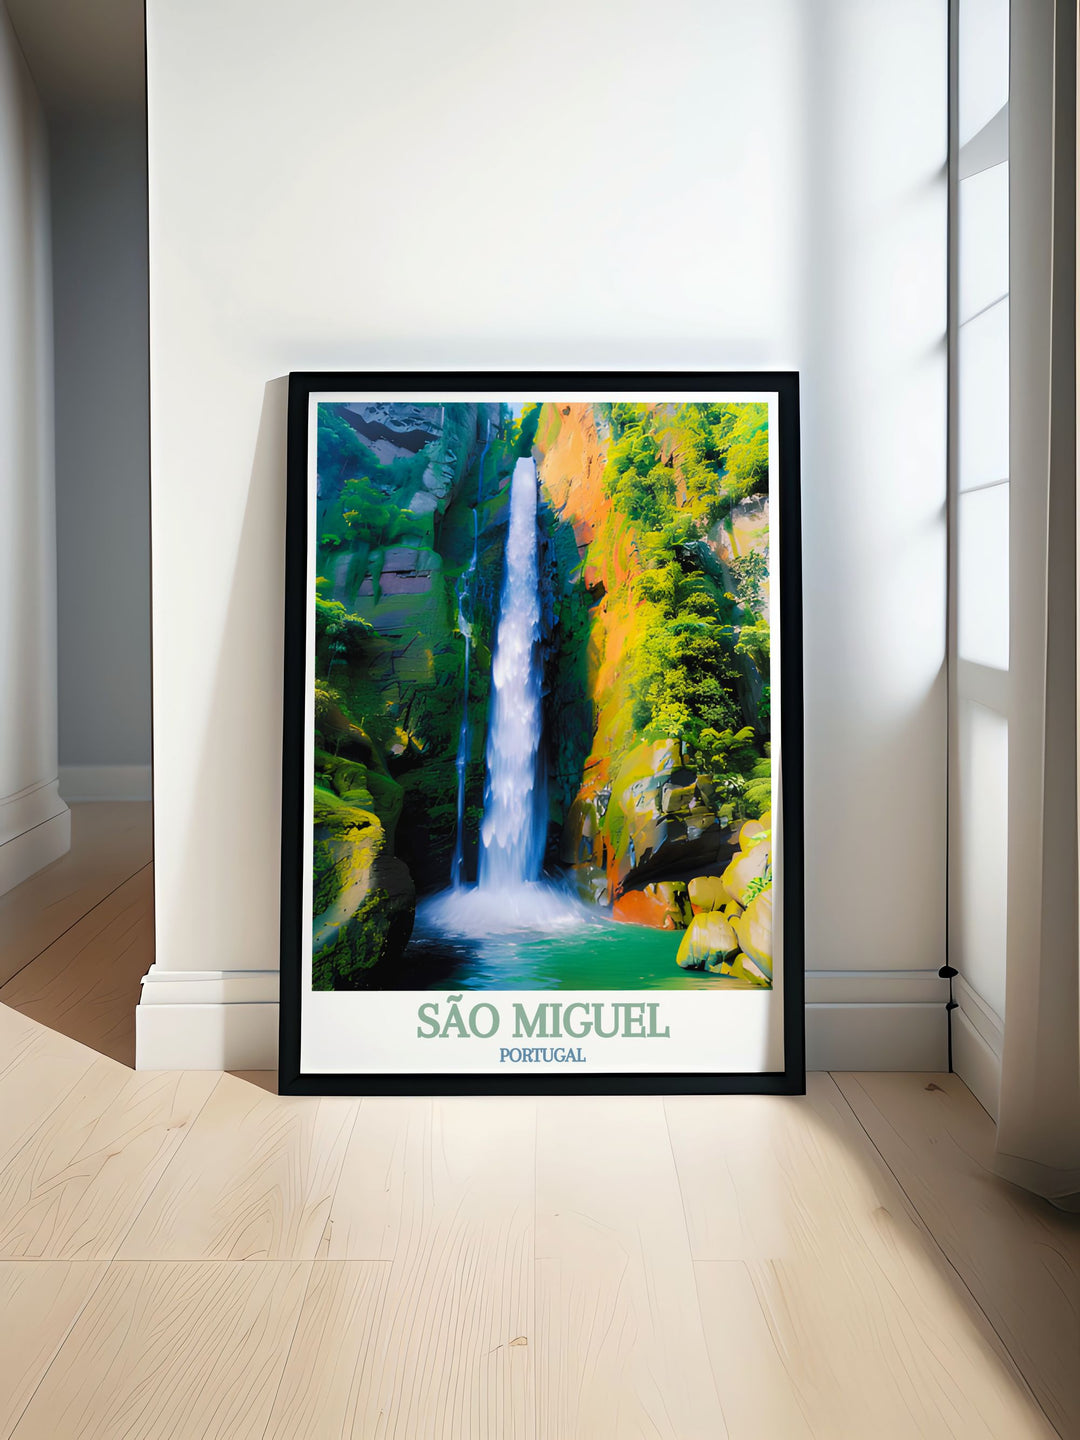 Beautiful art print of São Miguel, capturing the lush landscapes and iconic Salto do Cabrito waterfall in Portugal. Perfect addition to any Portugal themed decor.